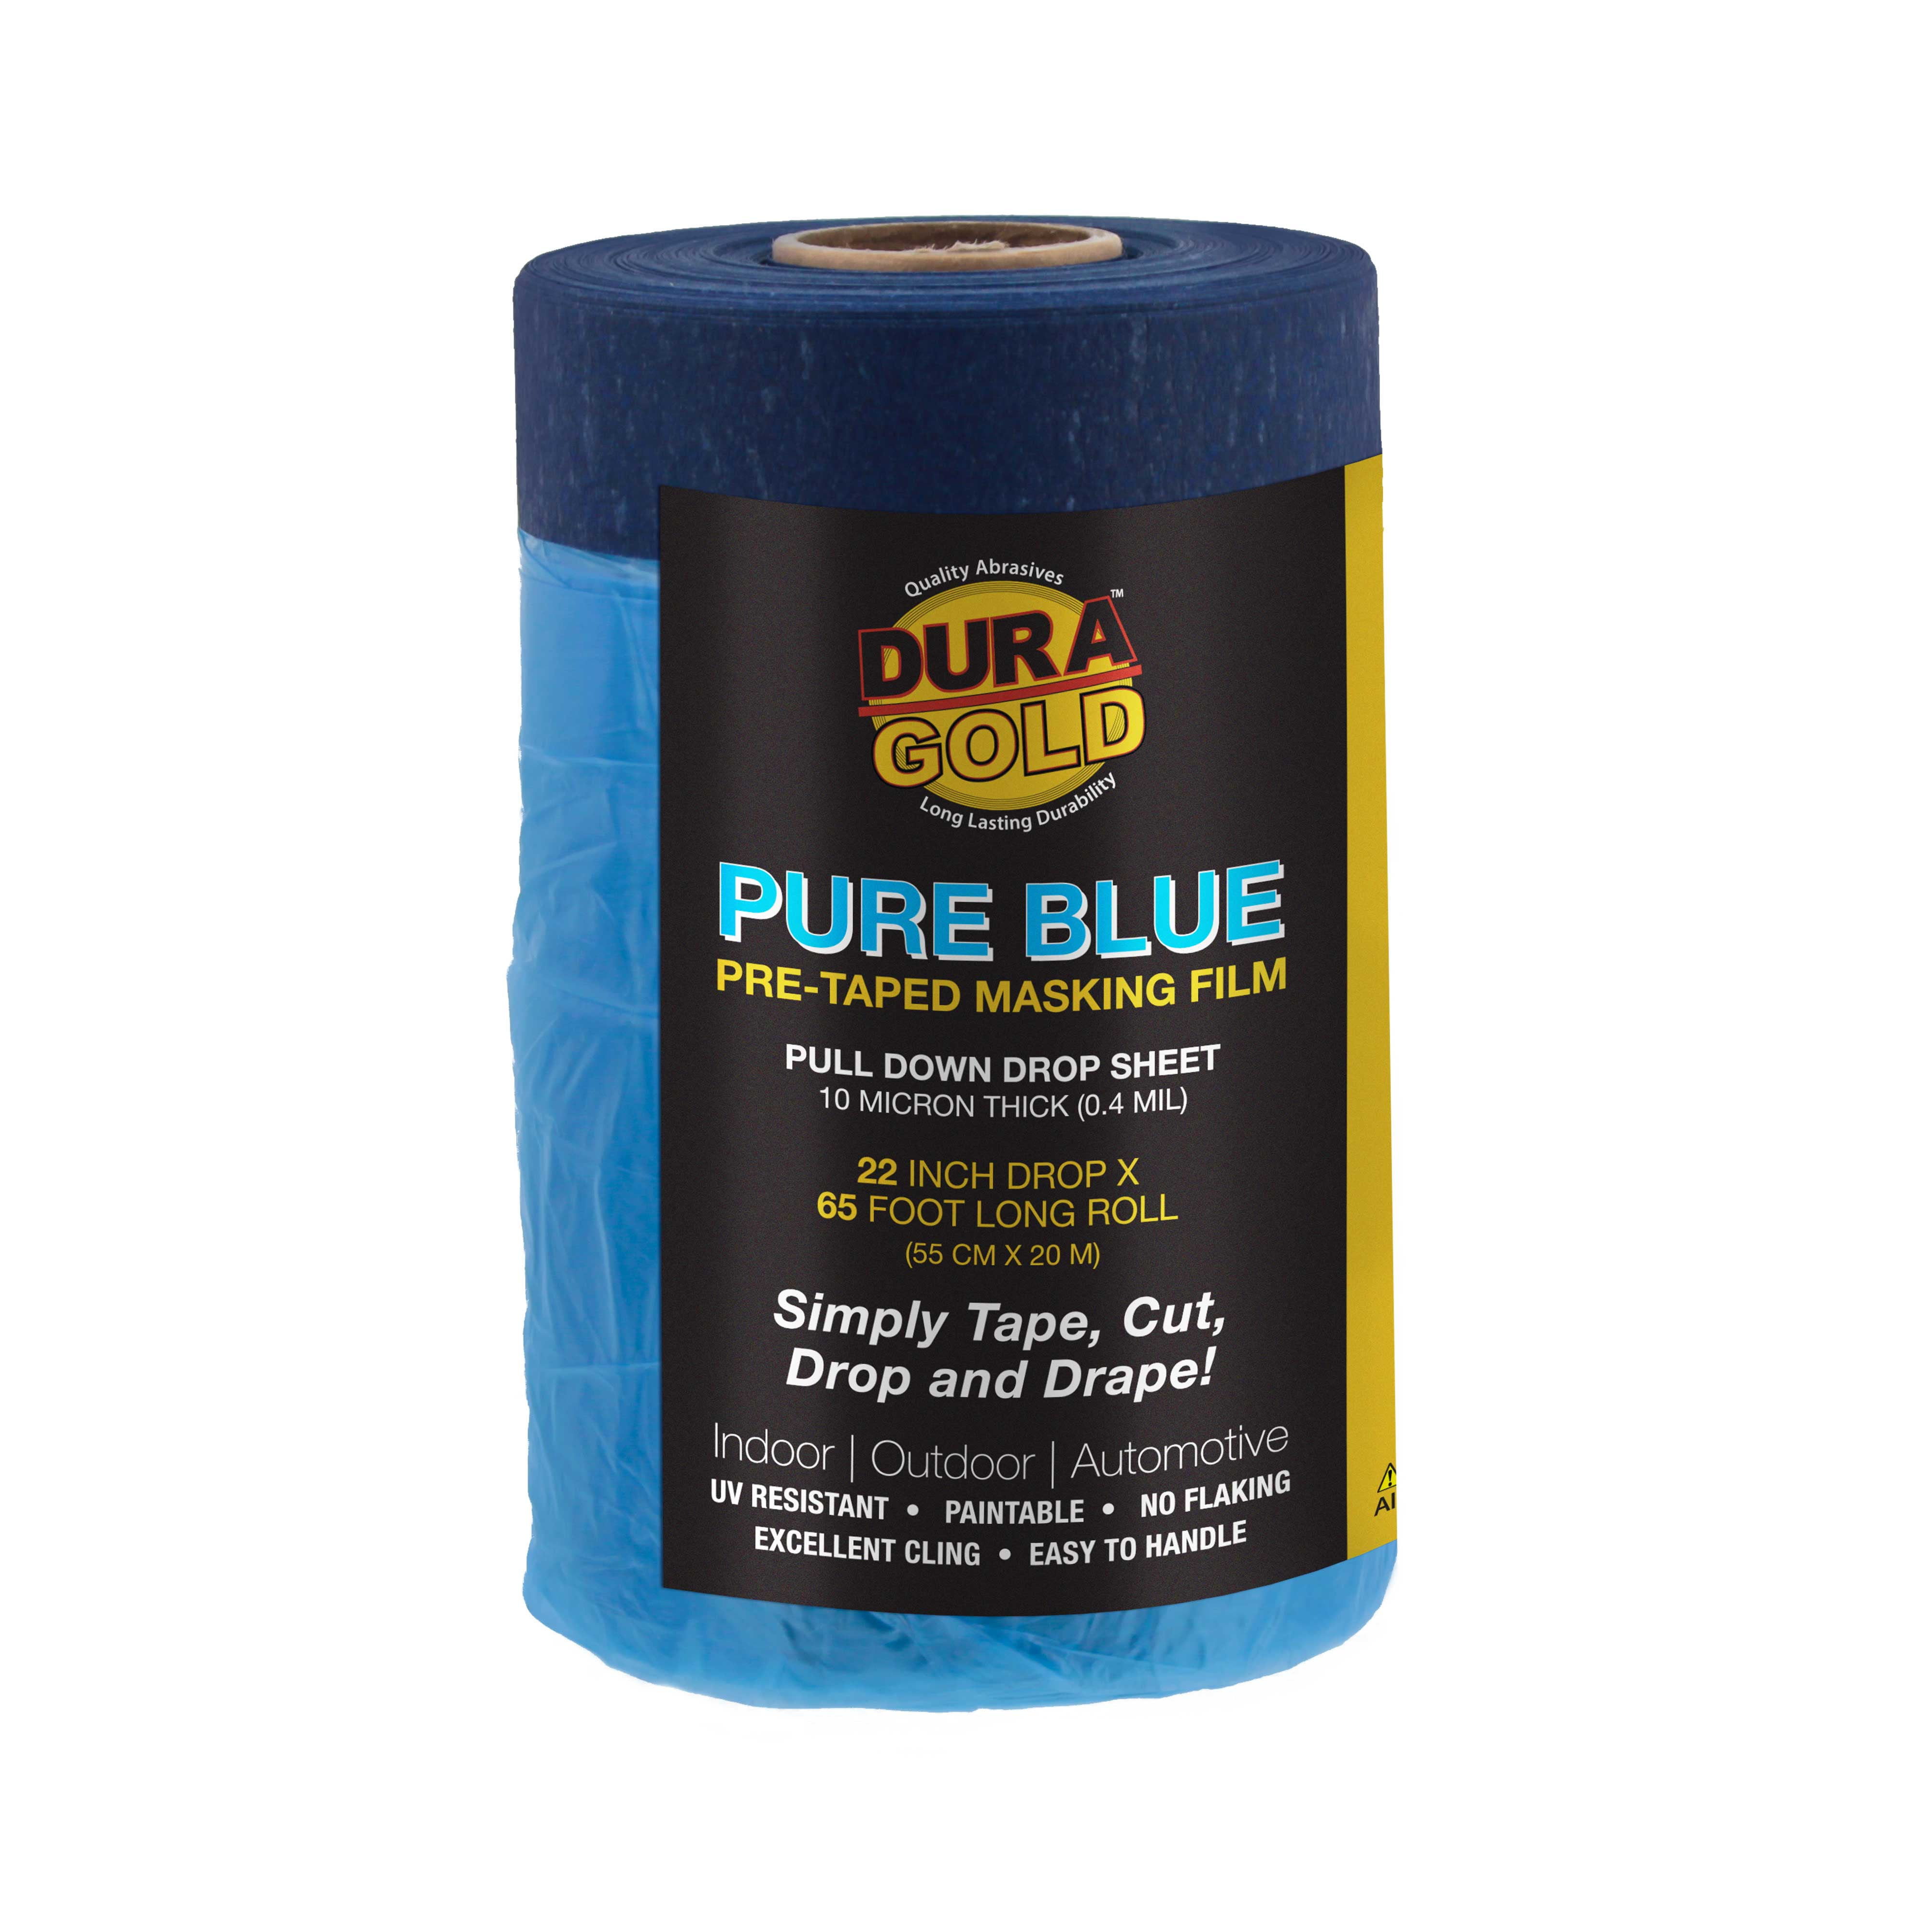 Dura-gold 48 Wide x 88' Long Roll of Pure Blue Pre-Folded Making Film, 0.4 Mil Overspray Paintable Plastic Protective Sheeting, Pull Down Drop